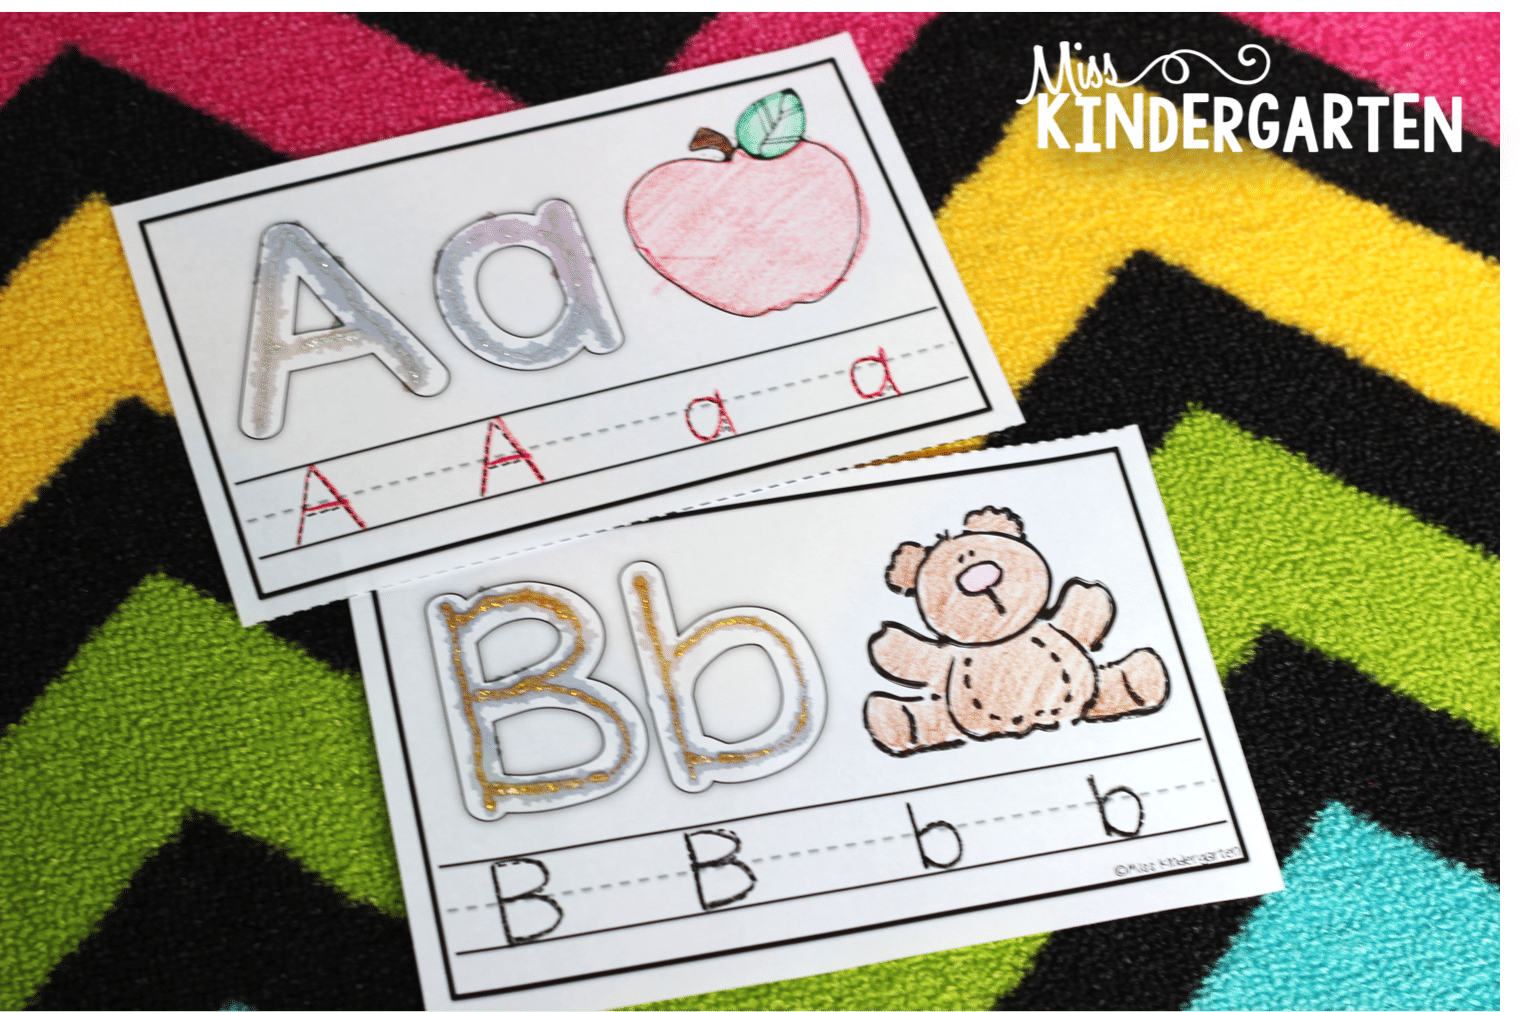 Alphabet mats for the letters A and B with glitter on the letters